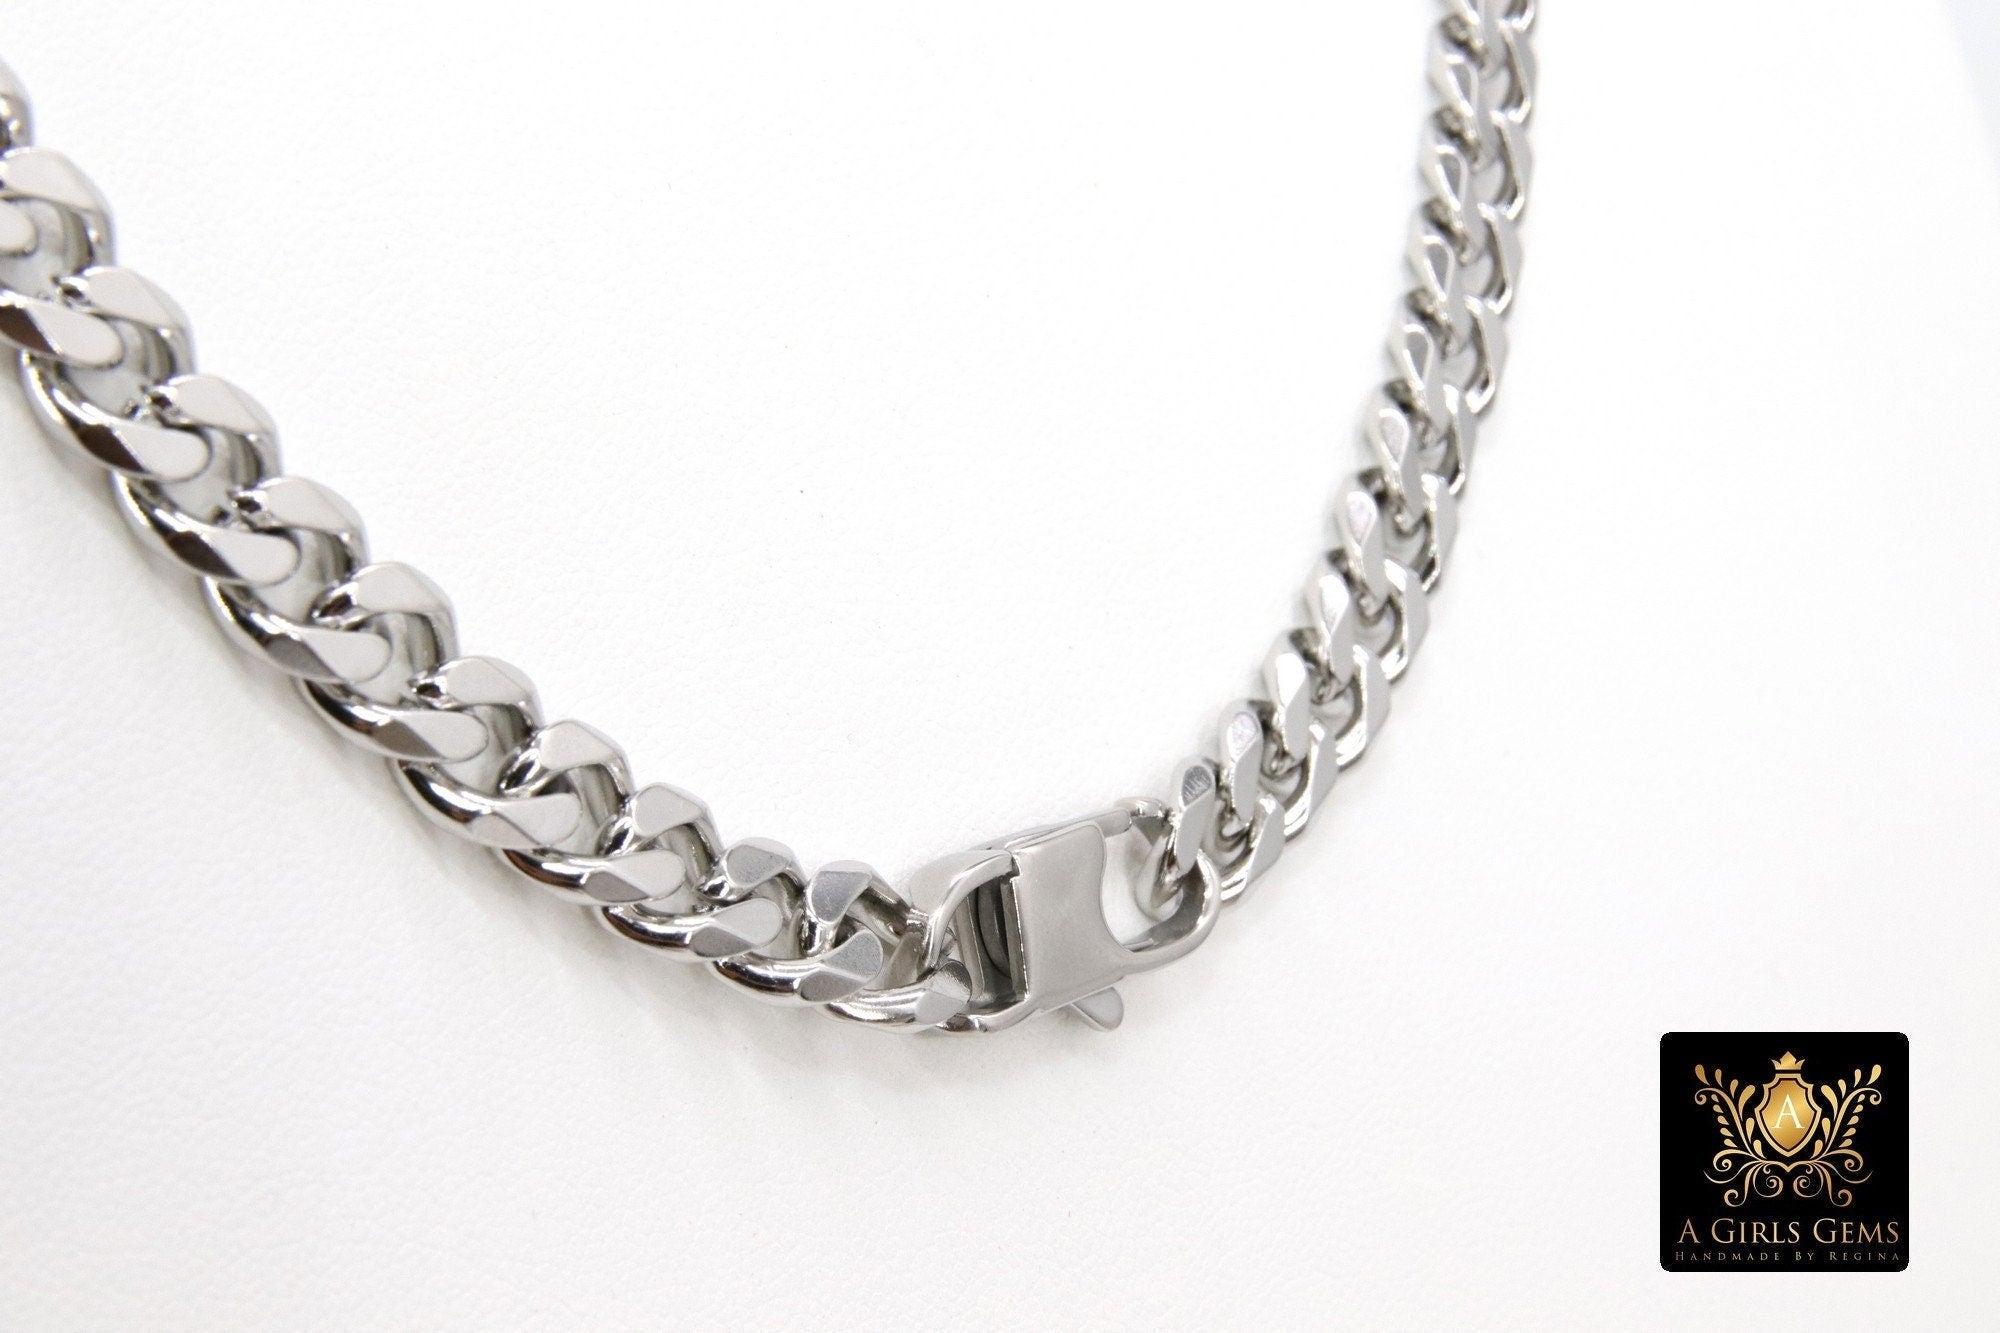 Men's Stainless Steel Chains | Blackjack Jewelry